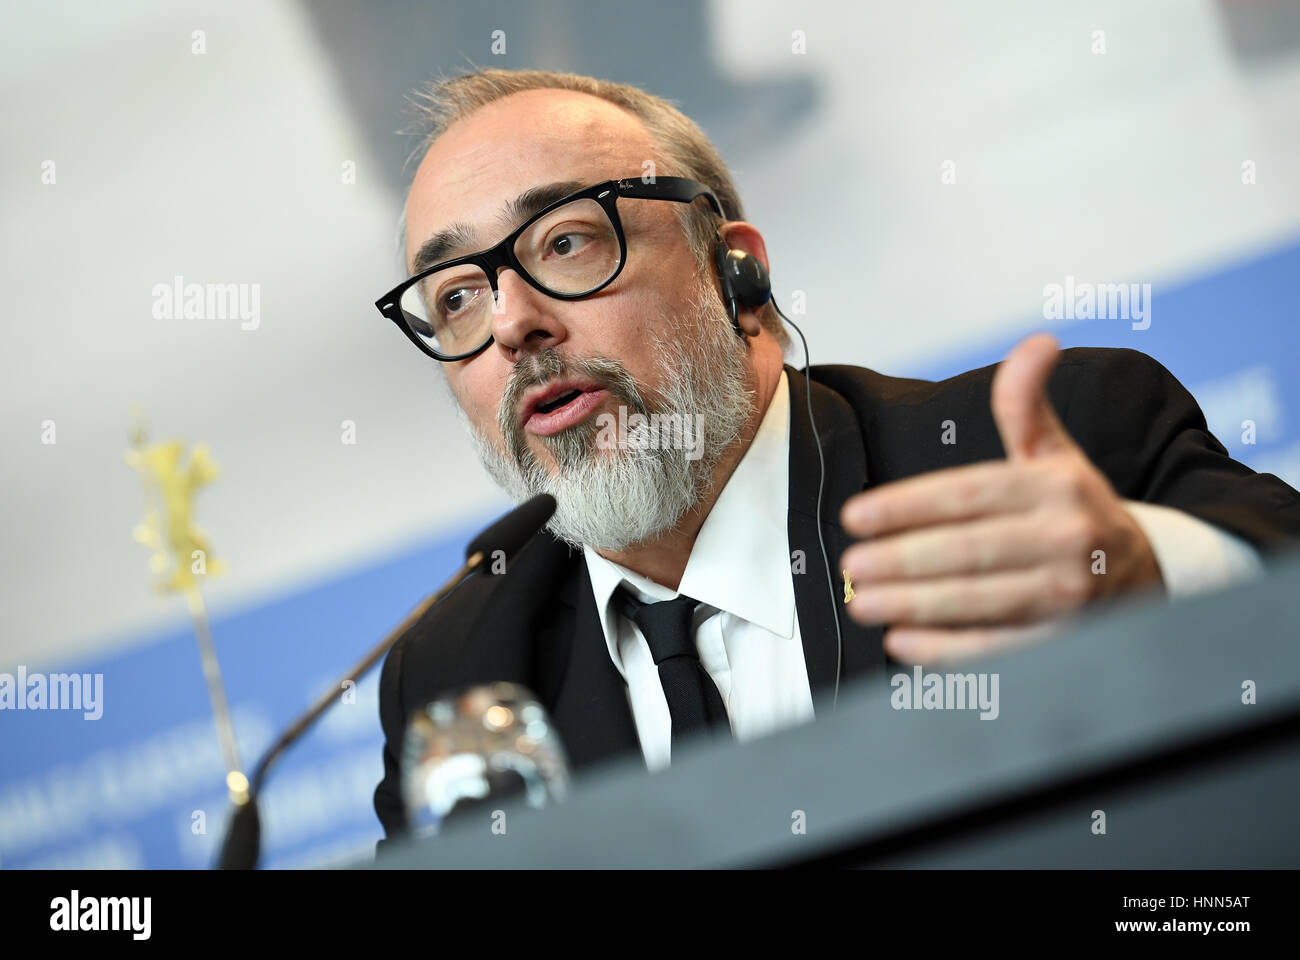 Berlin, Germany. 15th Feb, 2017. Director Alex de la Iglesia at the 67th Berlinale Film Festival for the 'El Bar' photocall in Berlin, Germany, 15 February 2017. The film has been nominated for the Berlinale. Photo: Britta Pedersen/dpa-Zentralbild/dpa/Alamy Live News Stock Photo